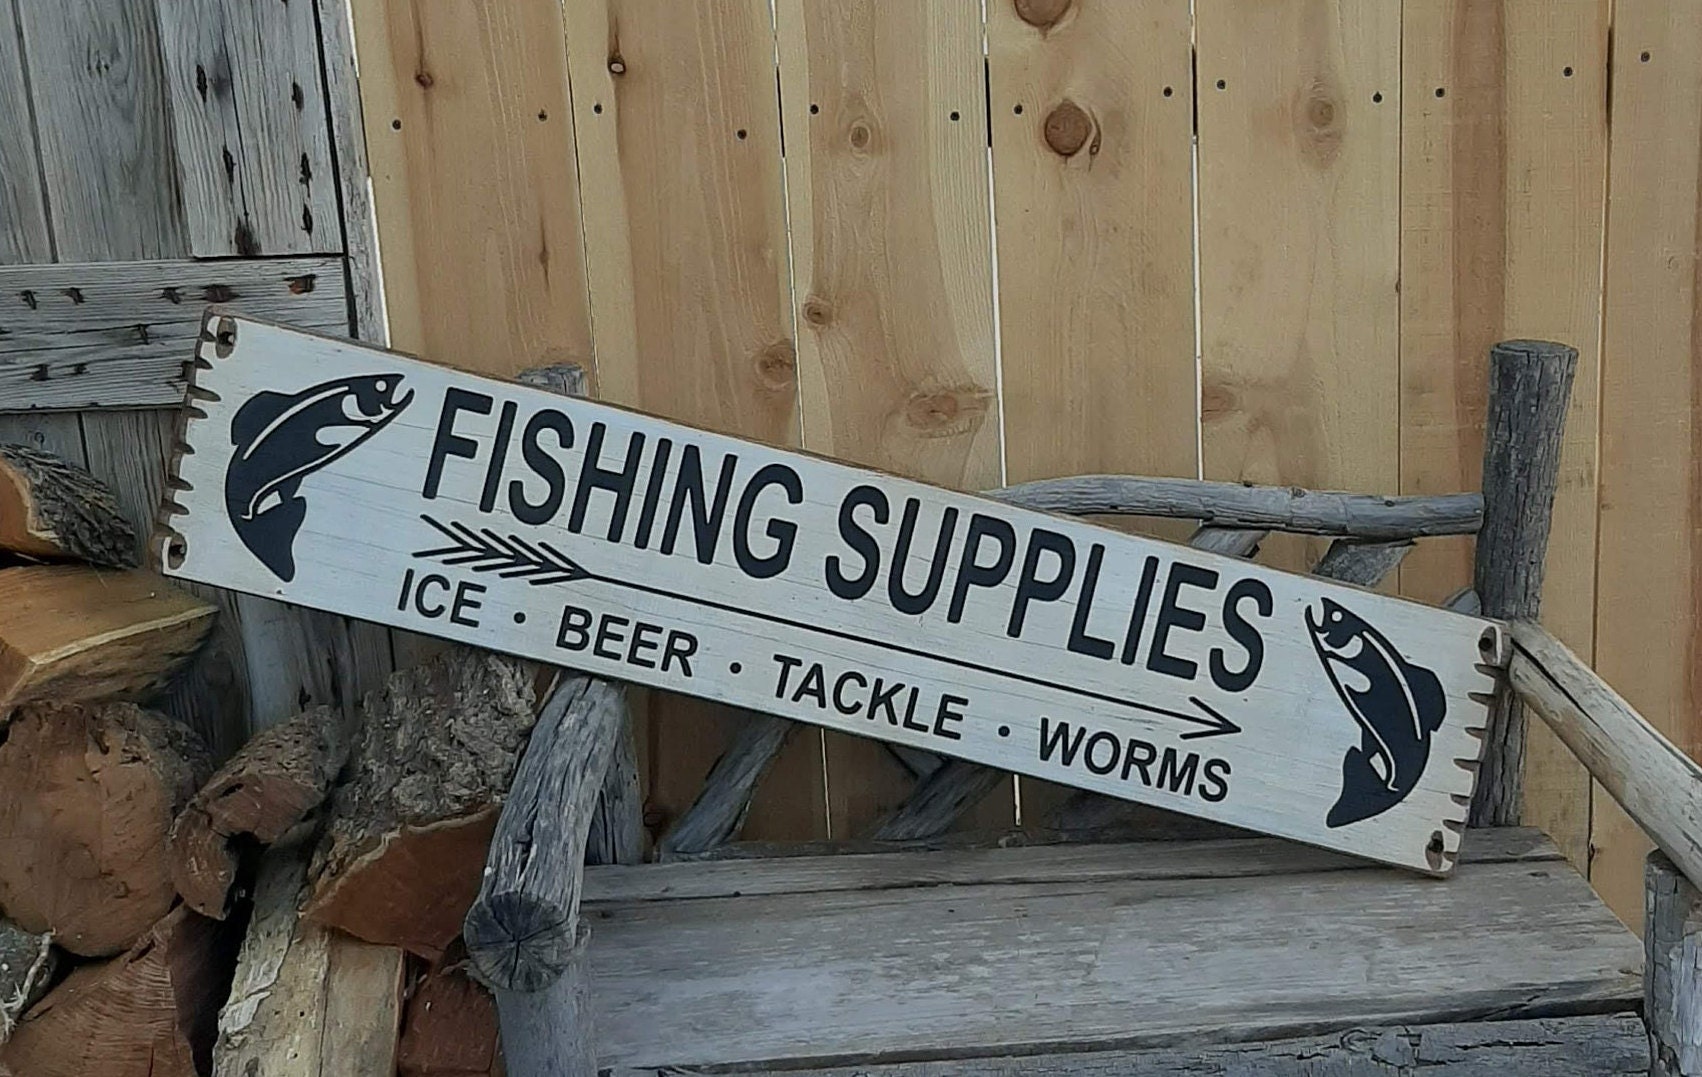 FISHING SUPPLIES Ice Beer Tackle Worms/carved/rustic/wood/sign /cabin/décor/lodge/tackle/marina/lake/boat Dock/mancave 